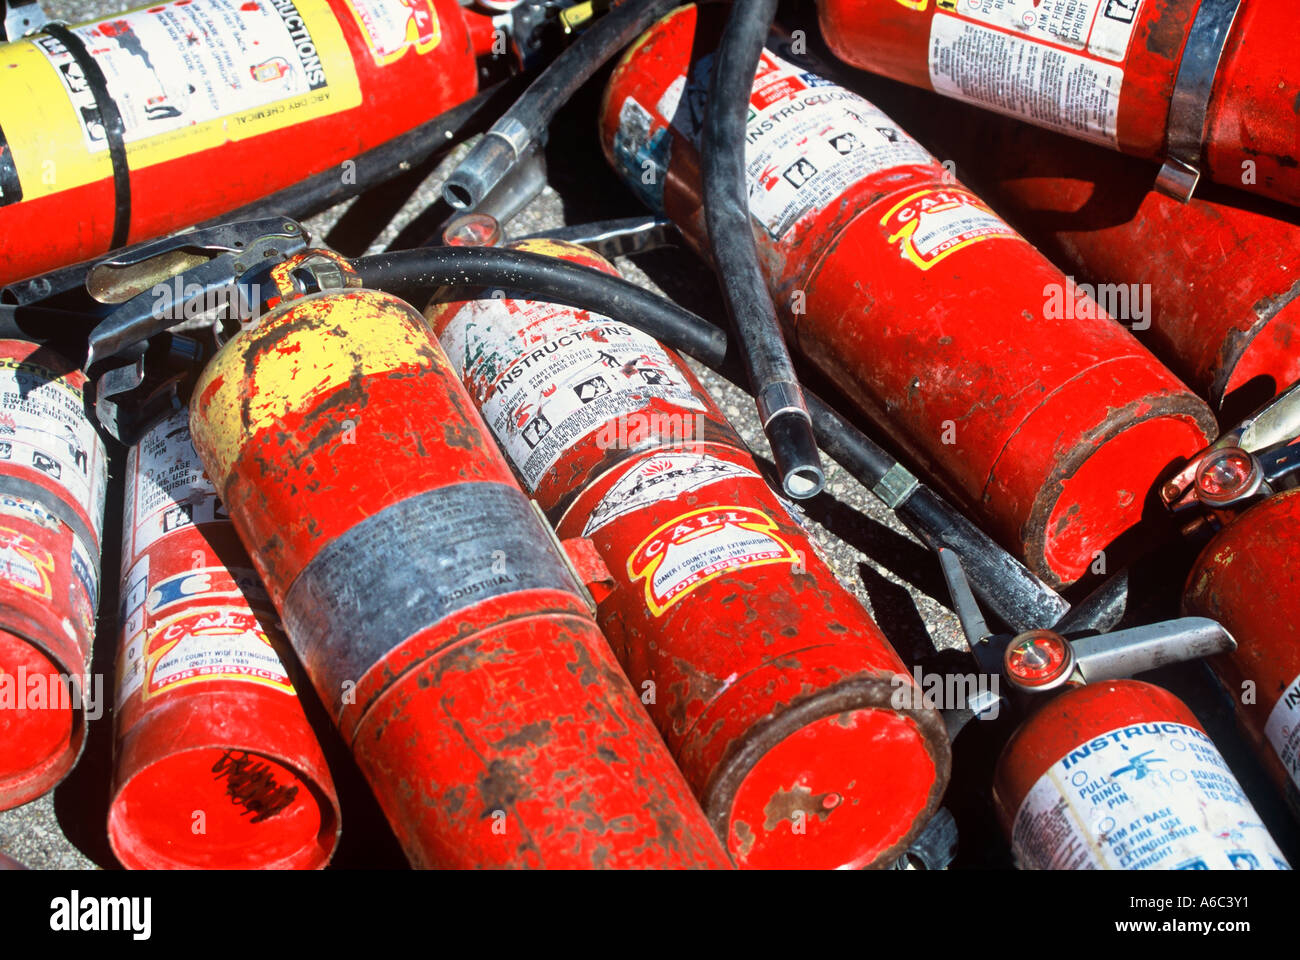 Old used extinguishers in a pile Stock Photo